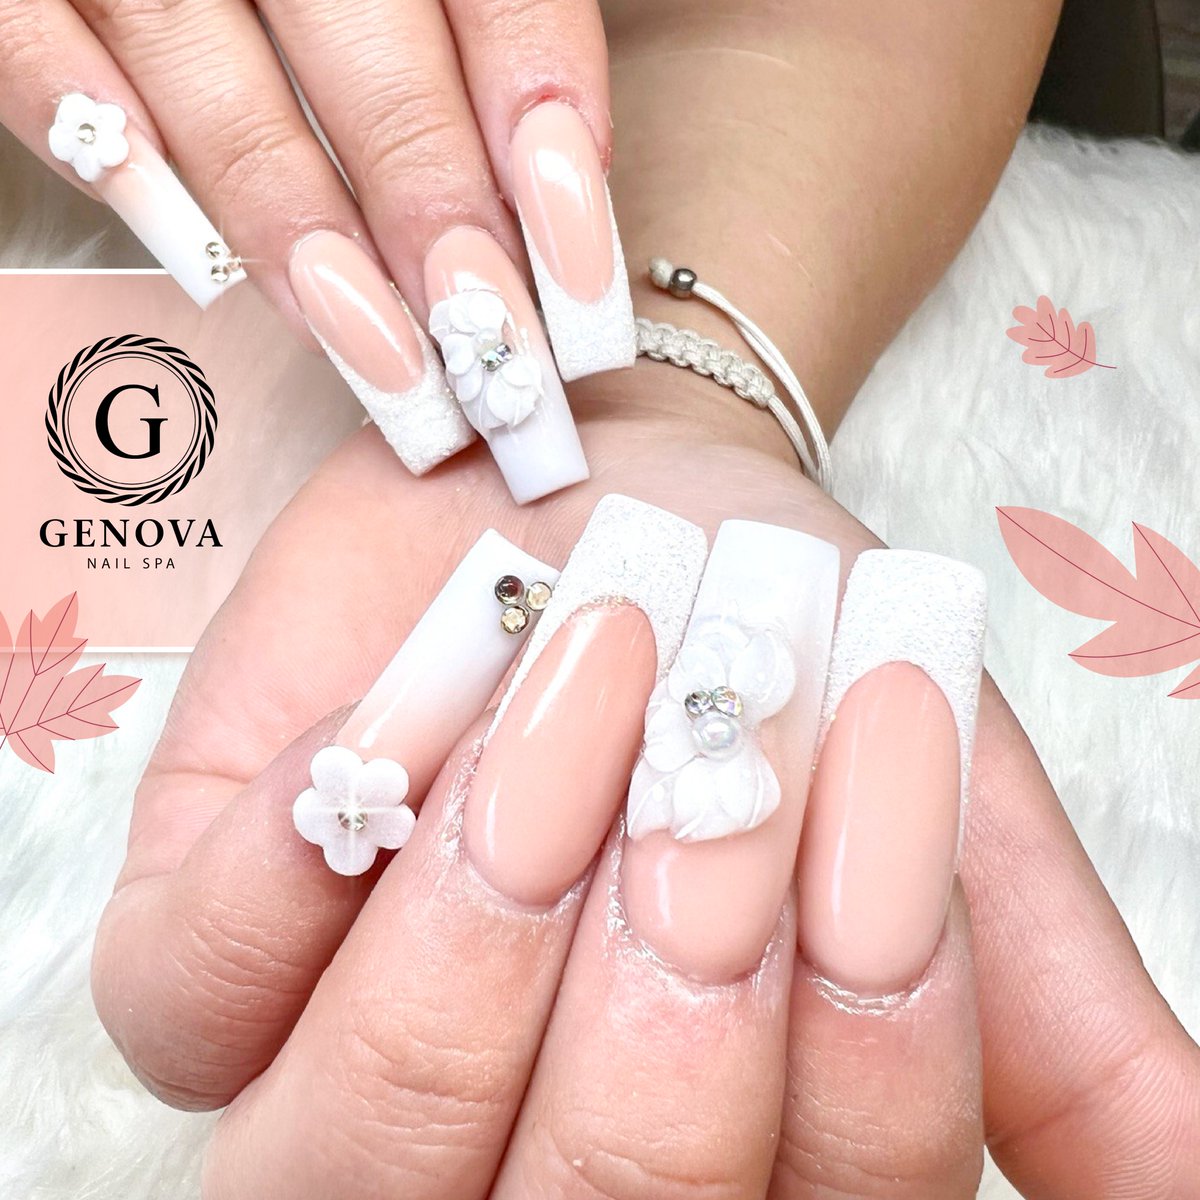 💖 Time to BLOW your nail game out of the water!
Visit Genova nail spa to express your creativity and leave with a masterpiece you can be proud of. 
 #genovanailspa #genovanailpearland #flowernailart #pinkwhitenails  #bestnailpearland